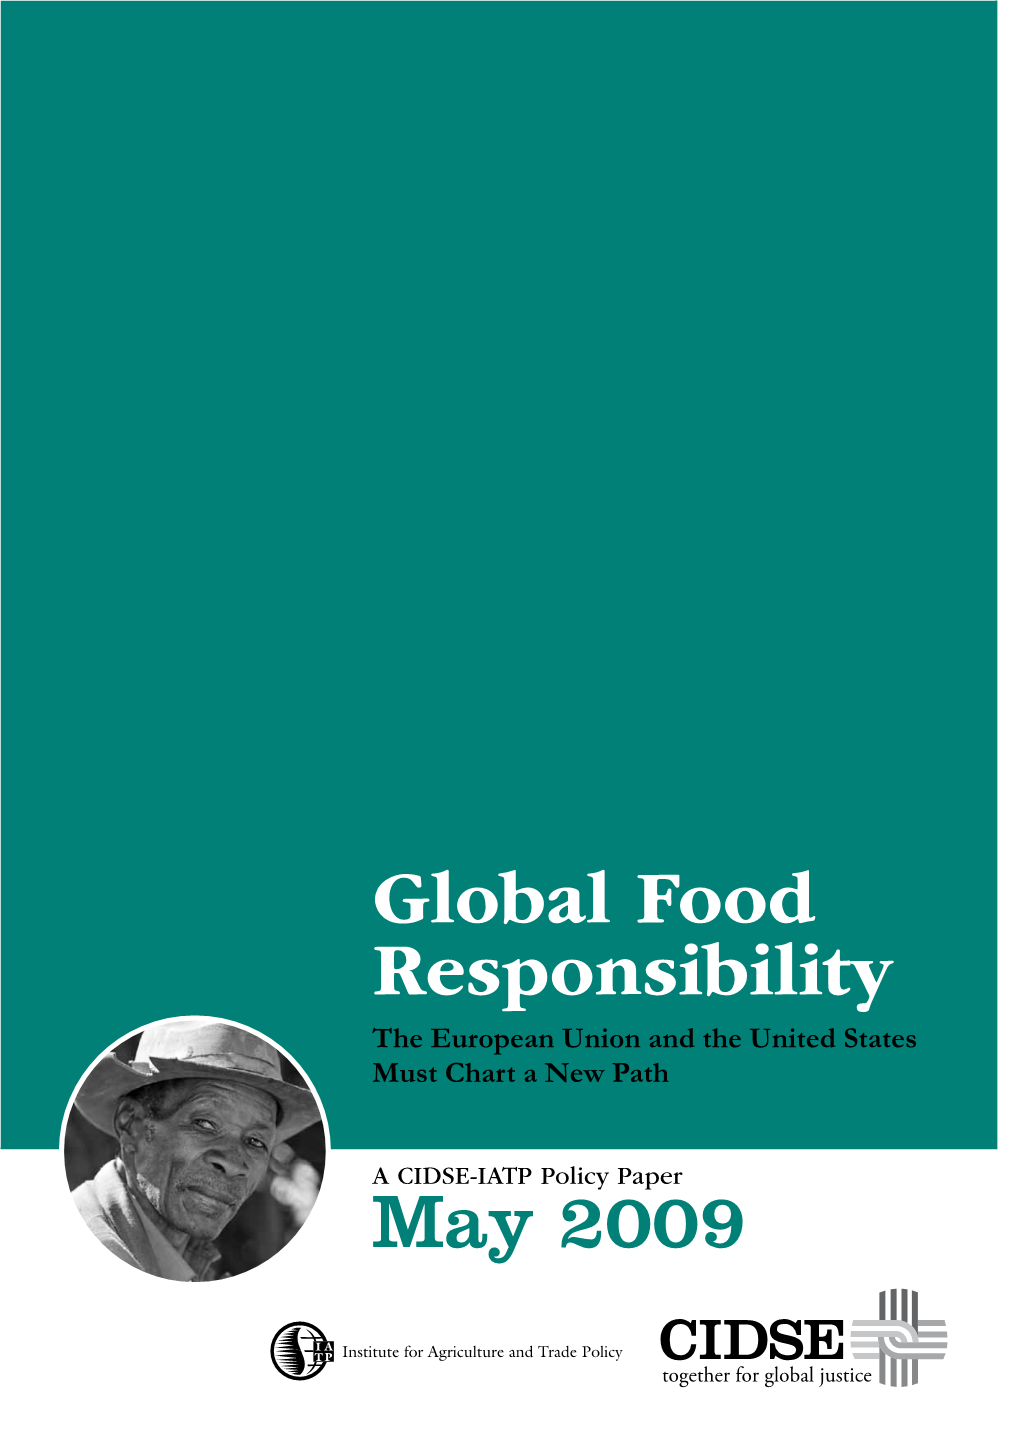 Global Food Responsibility the European Union and the United States Must Chart a New Path